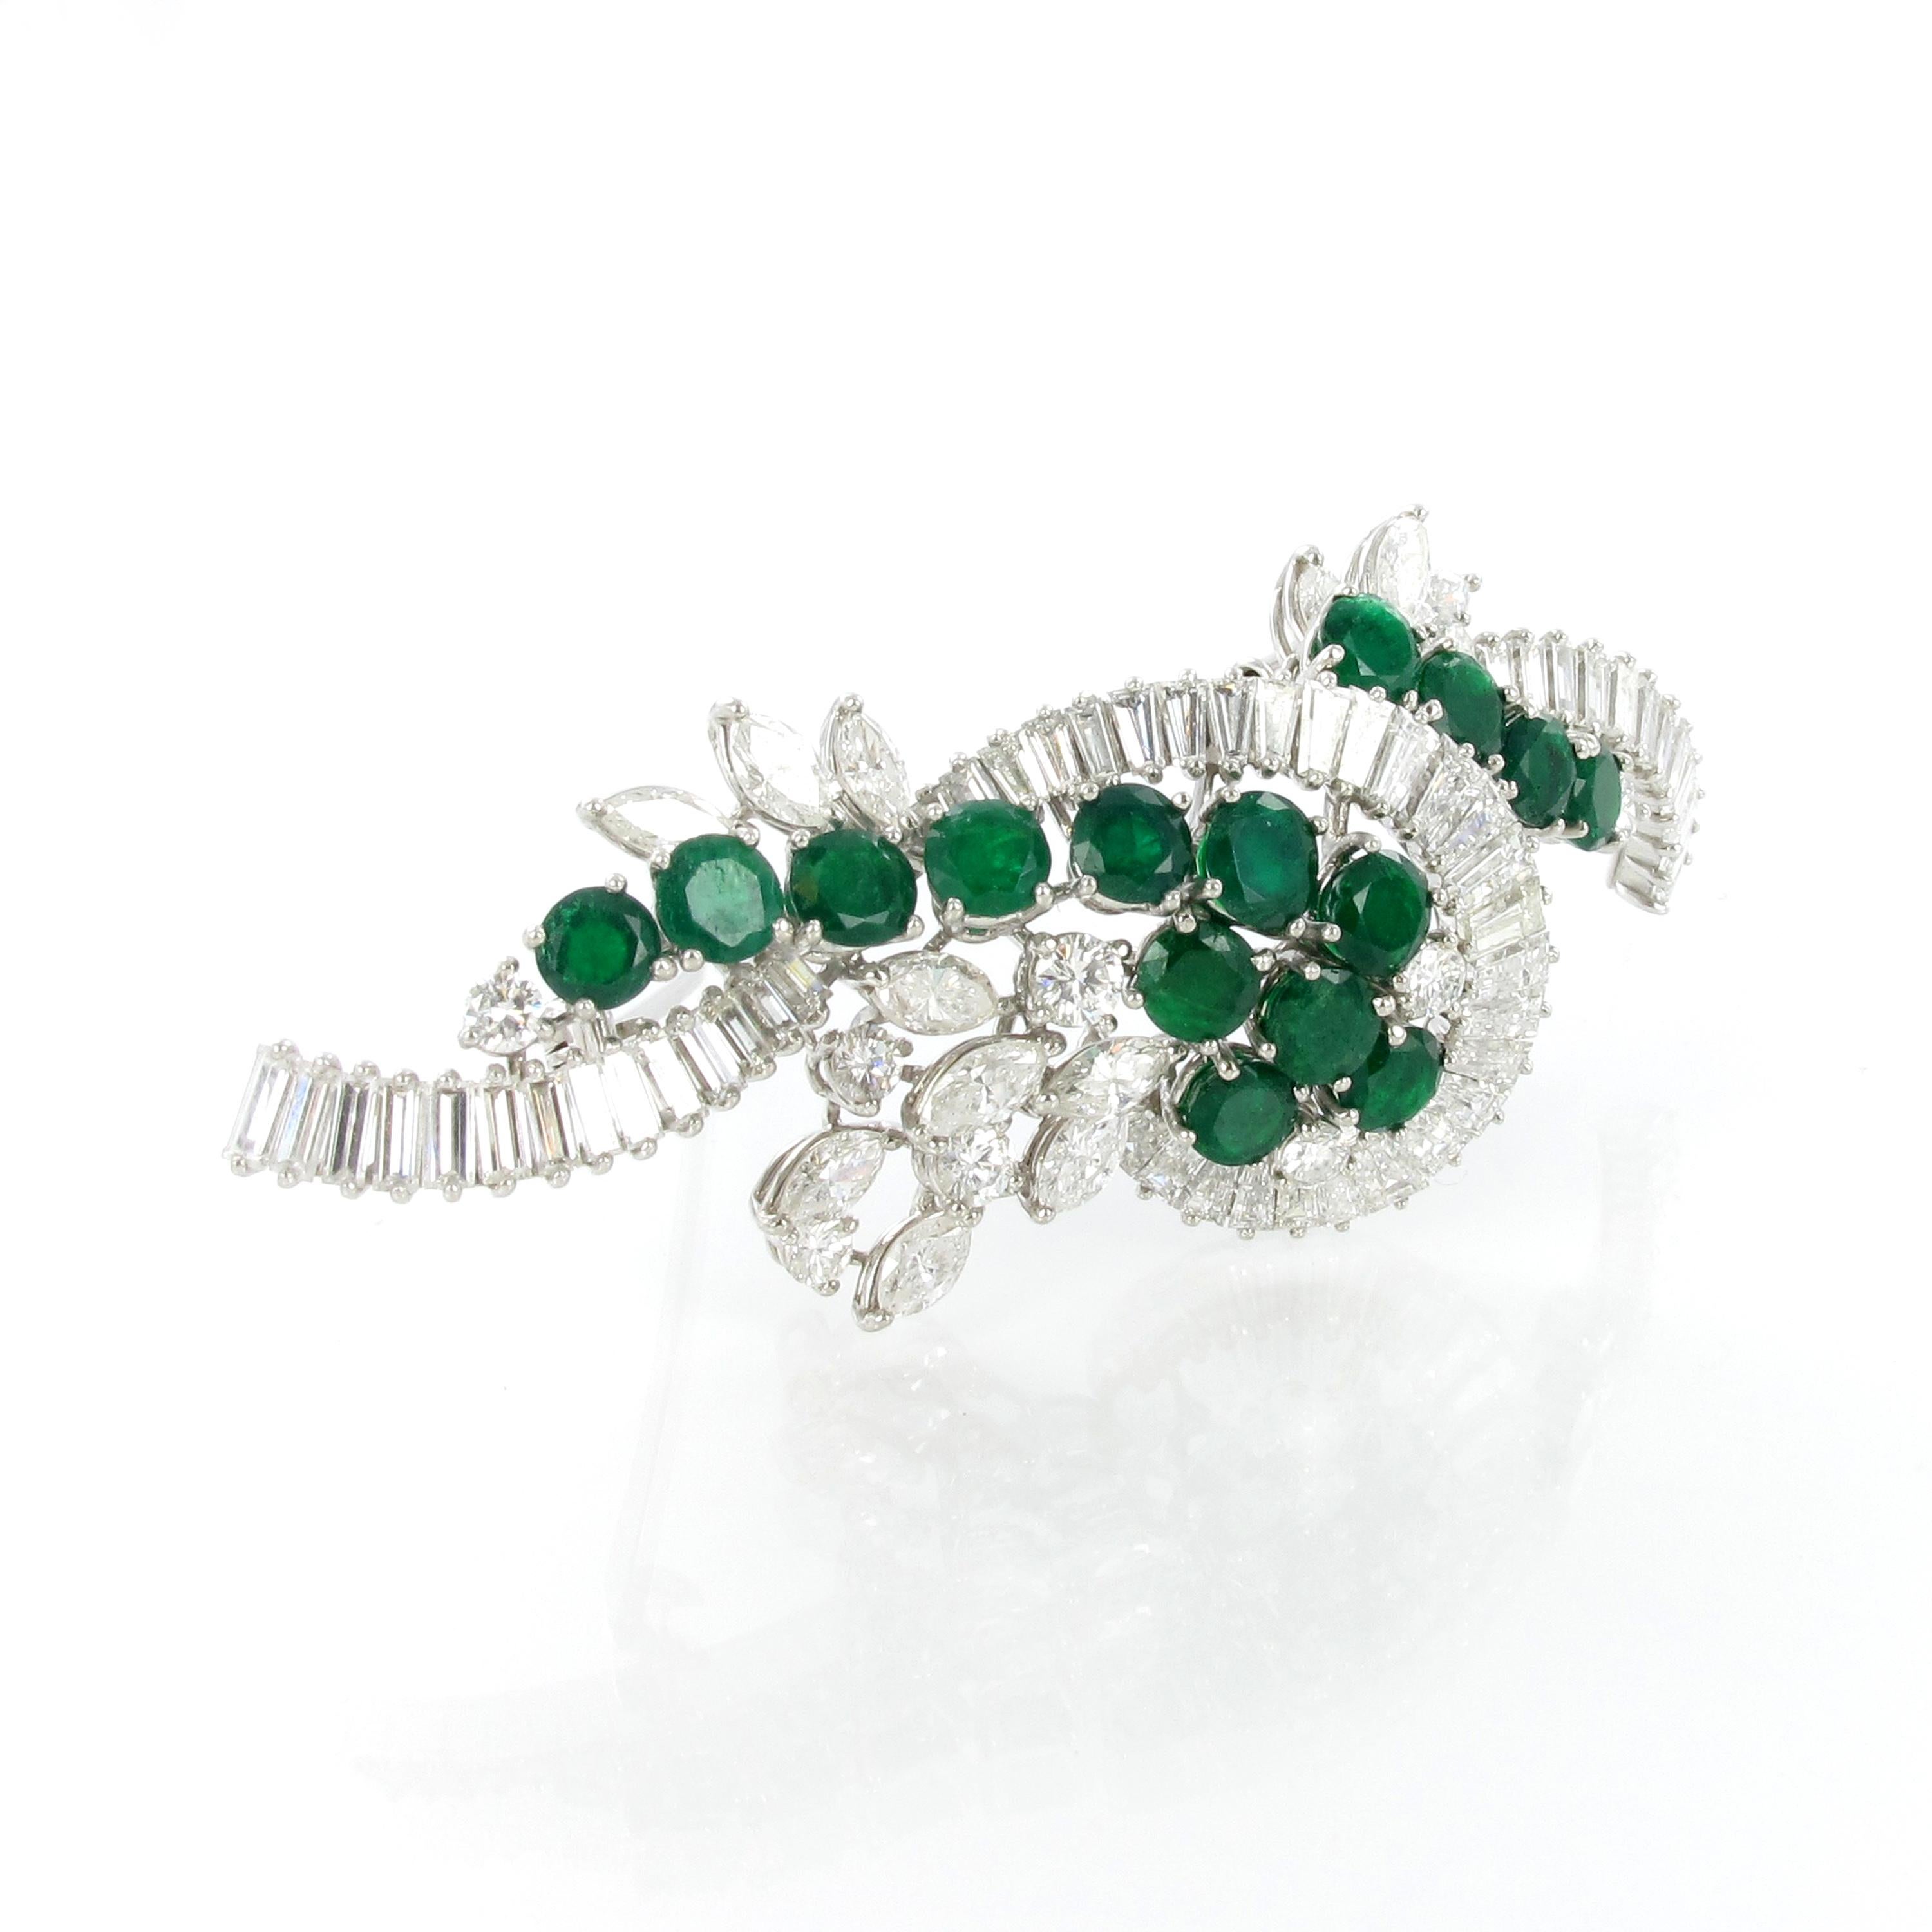 Elegant brooch in white gold 750. Set in prongs with 15 round cut emeralds and 75 diamonds of various shapes (round, marquise and tapered cut). Total weight of the emeralds approximate 3.40 ct, total weight of diamonds approximate 5.94